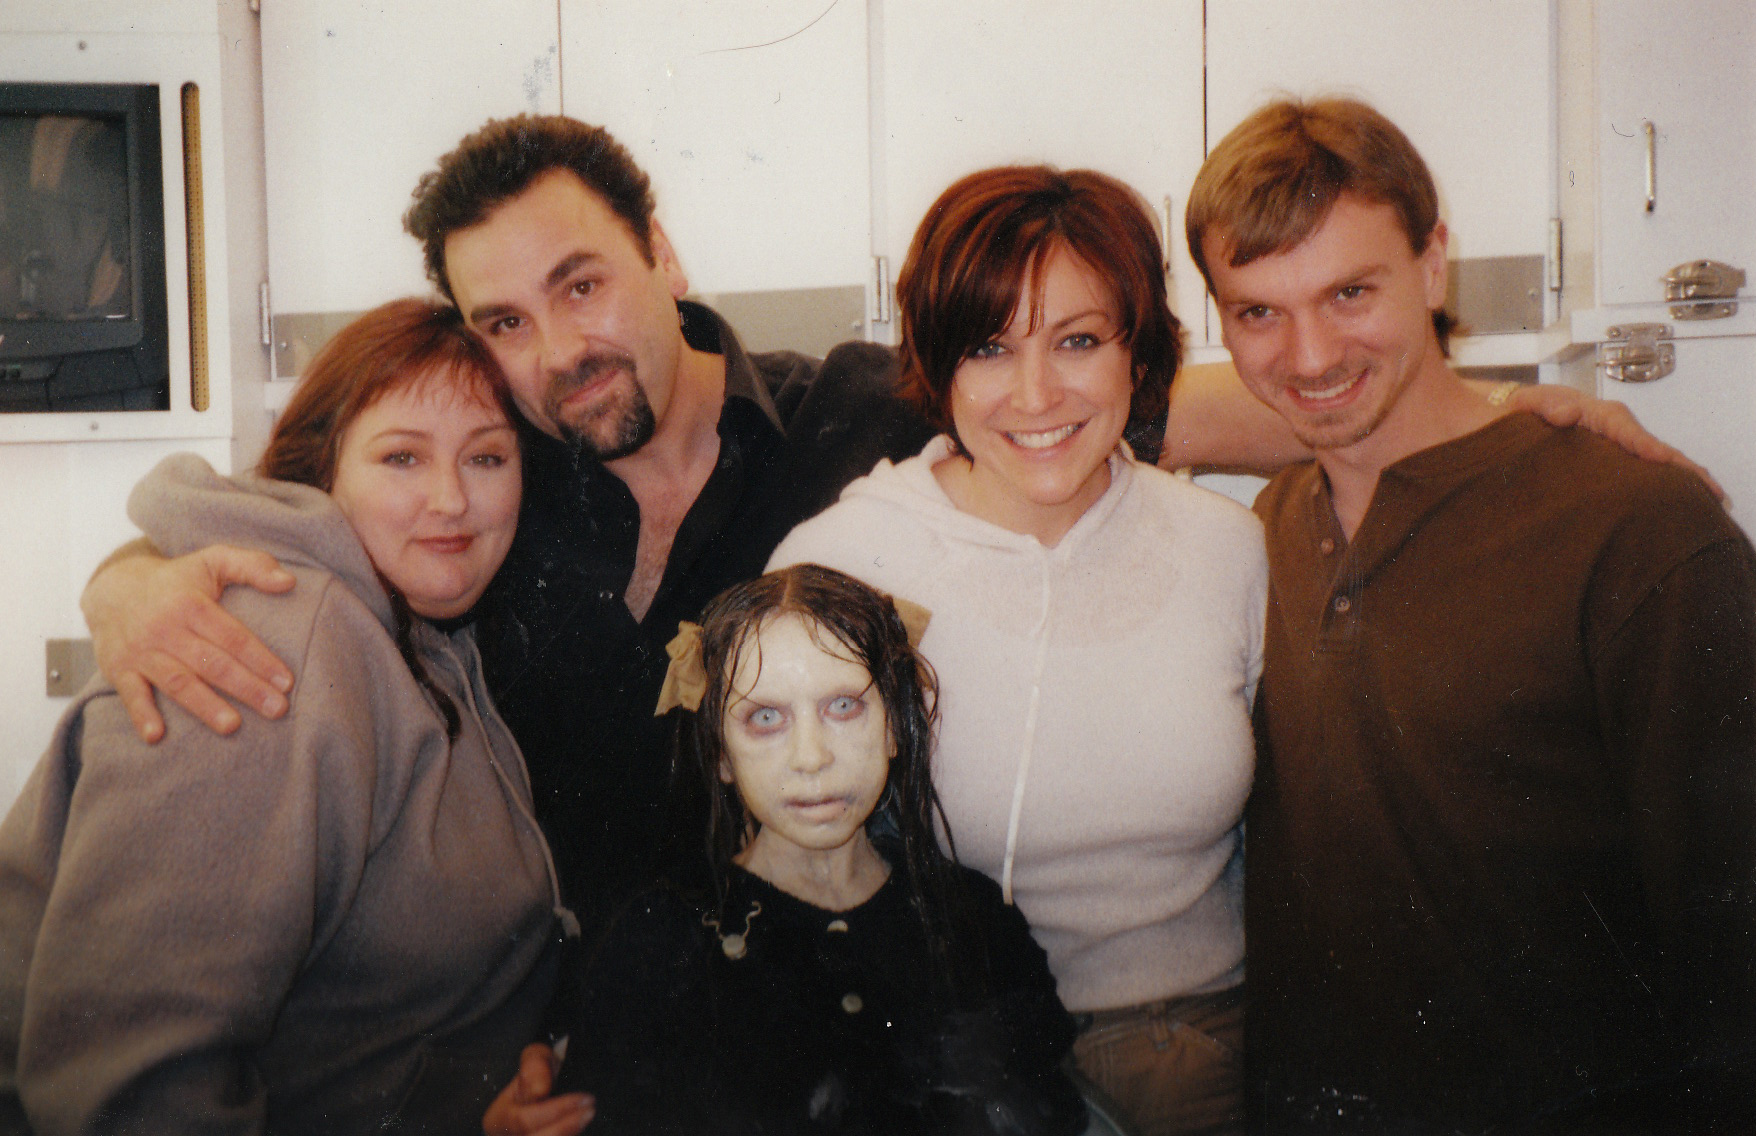 Lauren, Betty, John Caglione, Janice and Derek on the set of Blair Witch 2.